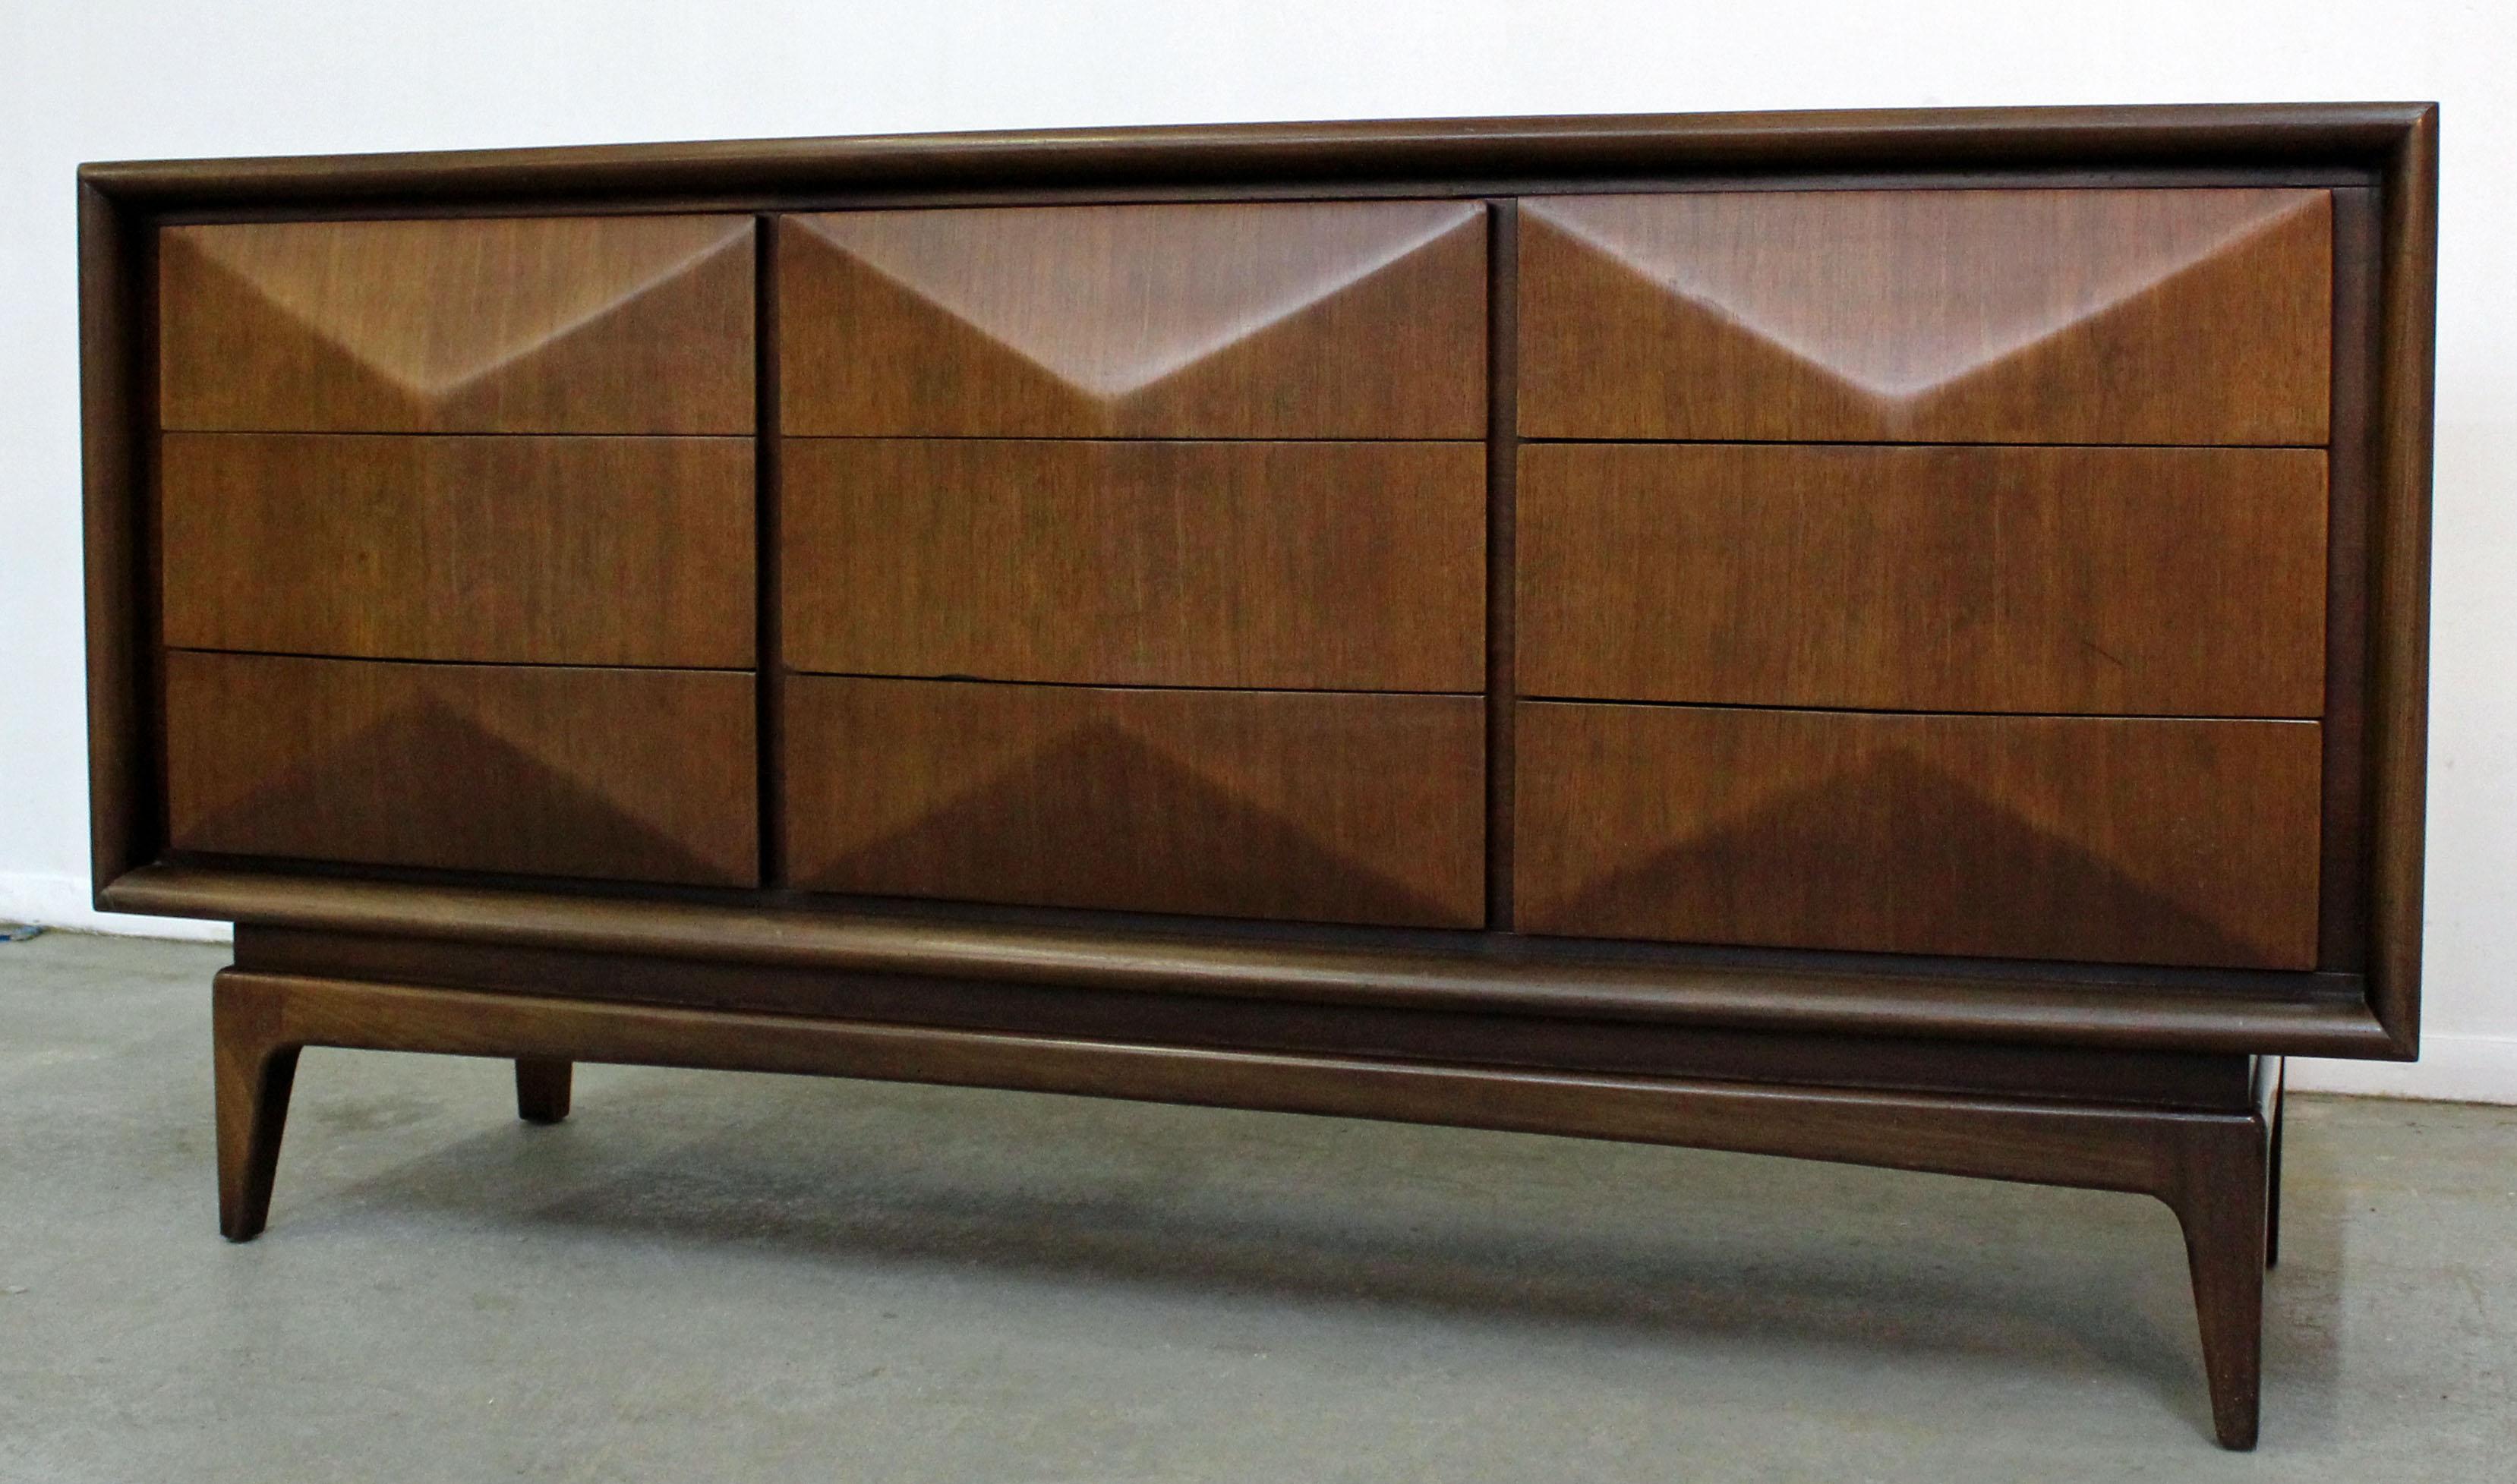 Offered is a walnut credenza/dresser made by United. Features nine dovetailed drawers with a sculpted front and hidden side pulls. It is in excellent condition, has been refinished. It is signed by United Furniture.

Dimensions:
62